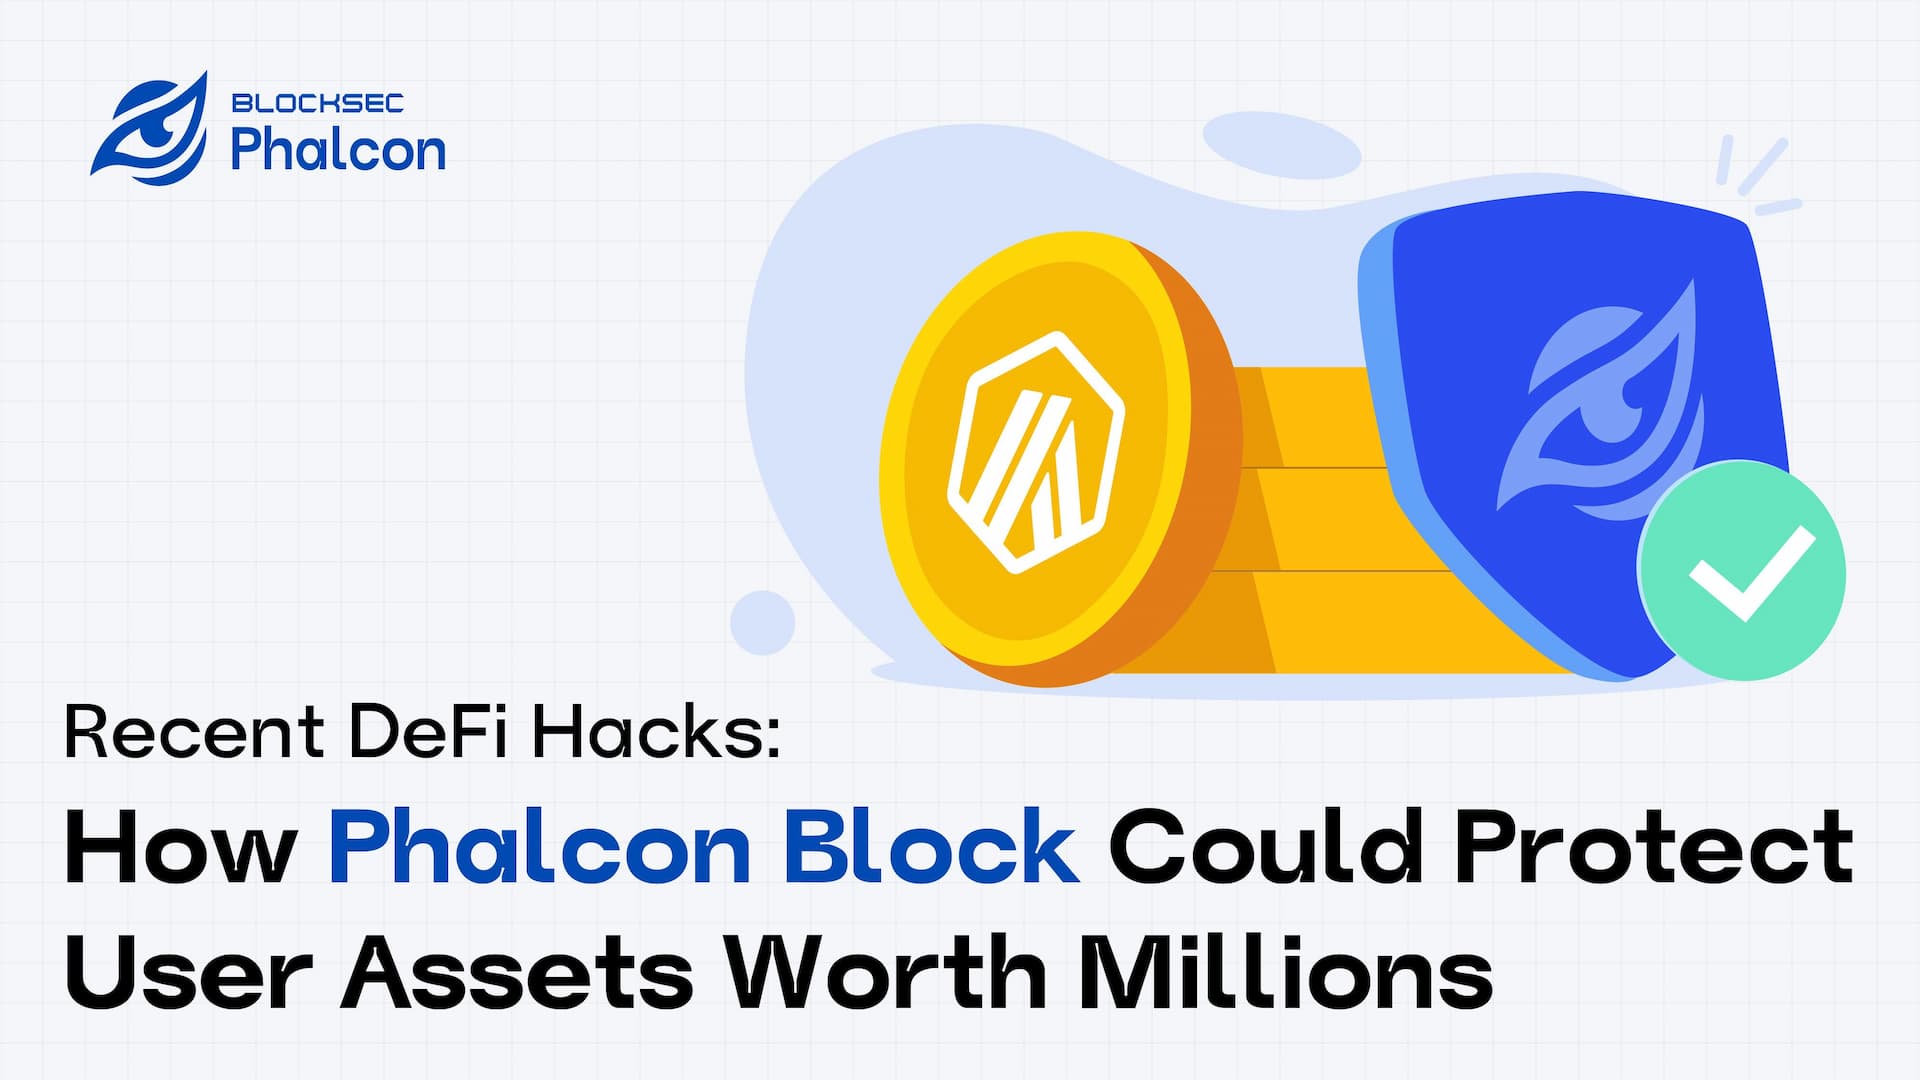 Recent DeFi Hacks: How Phalcon Block Could Protect User Assets Worth Millions